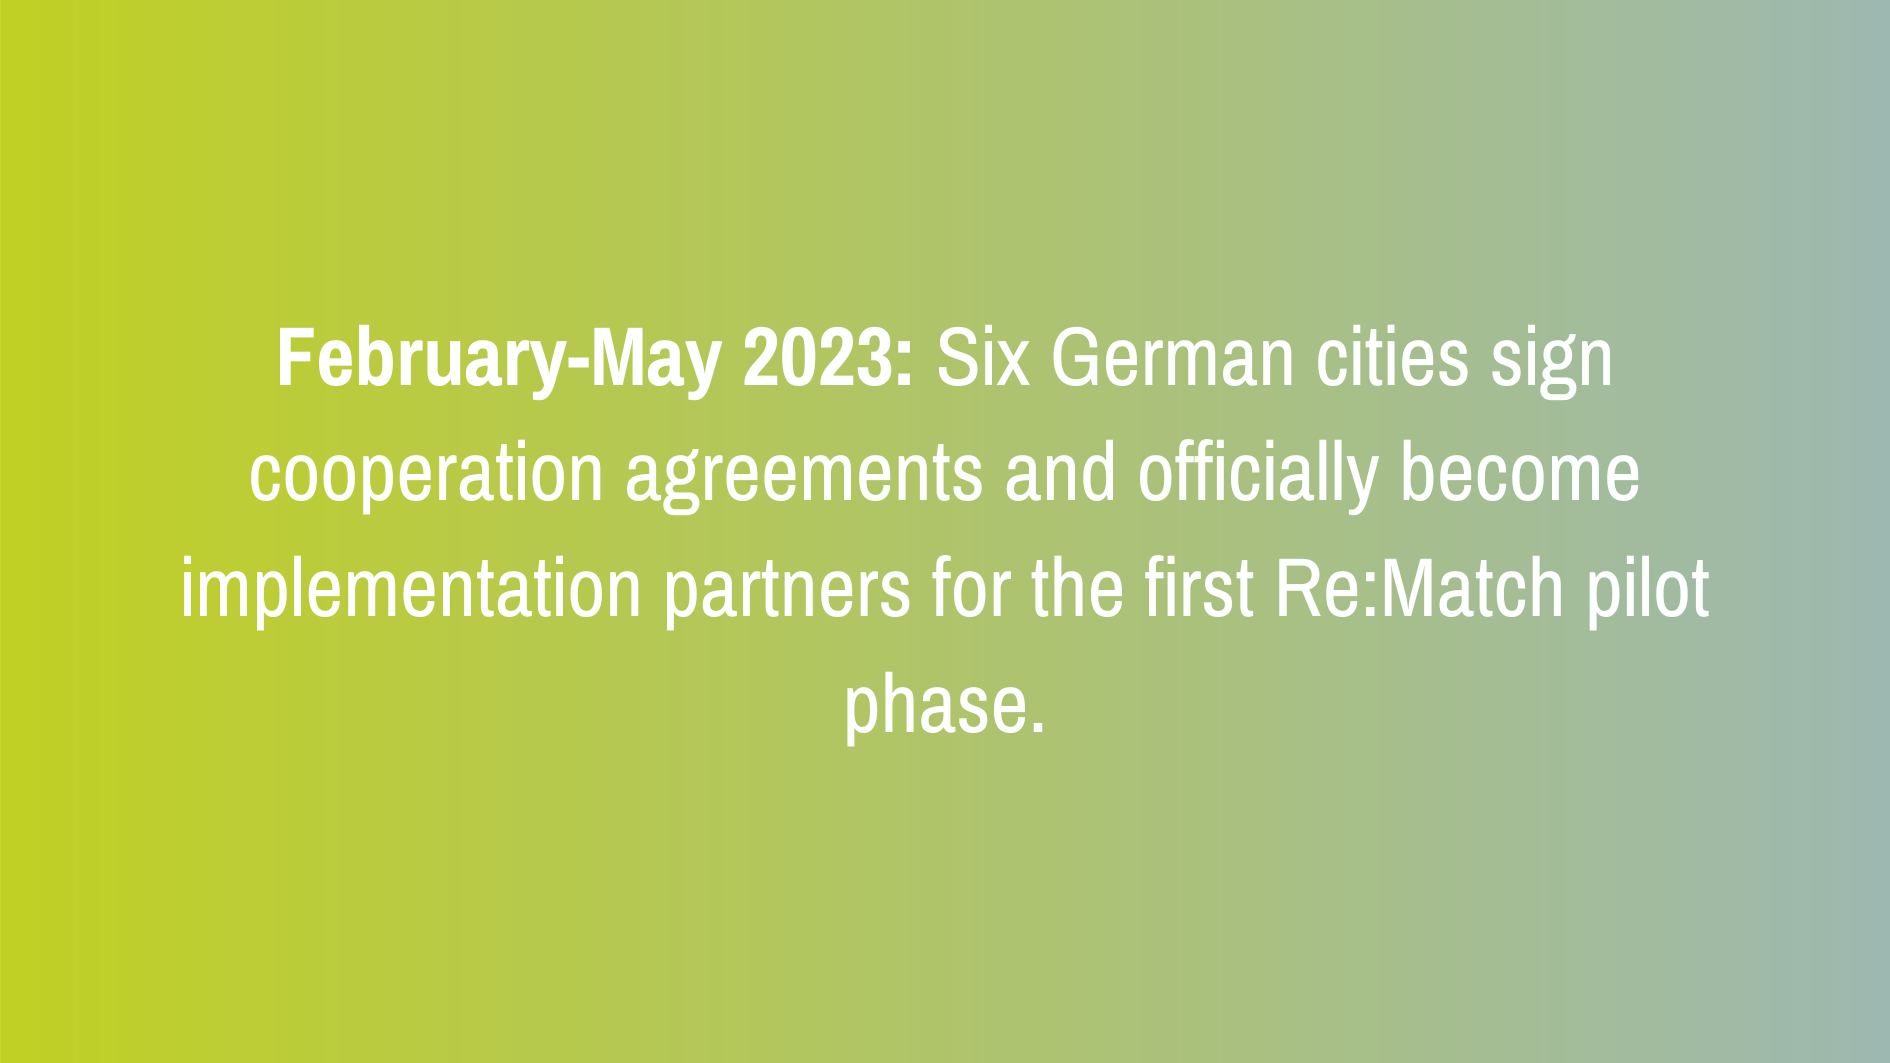 February-May 2023: Six German cities sign cooperation agreements and officially become implementation partners for the first Re:Match pilot phase.